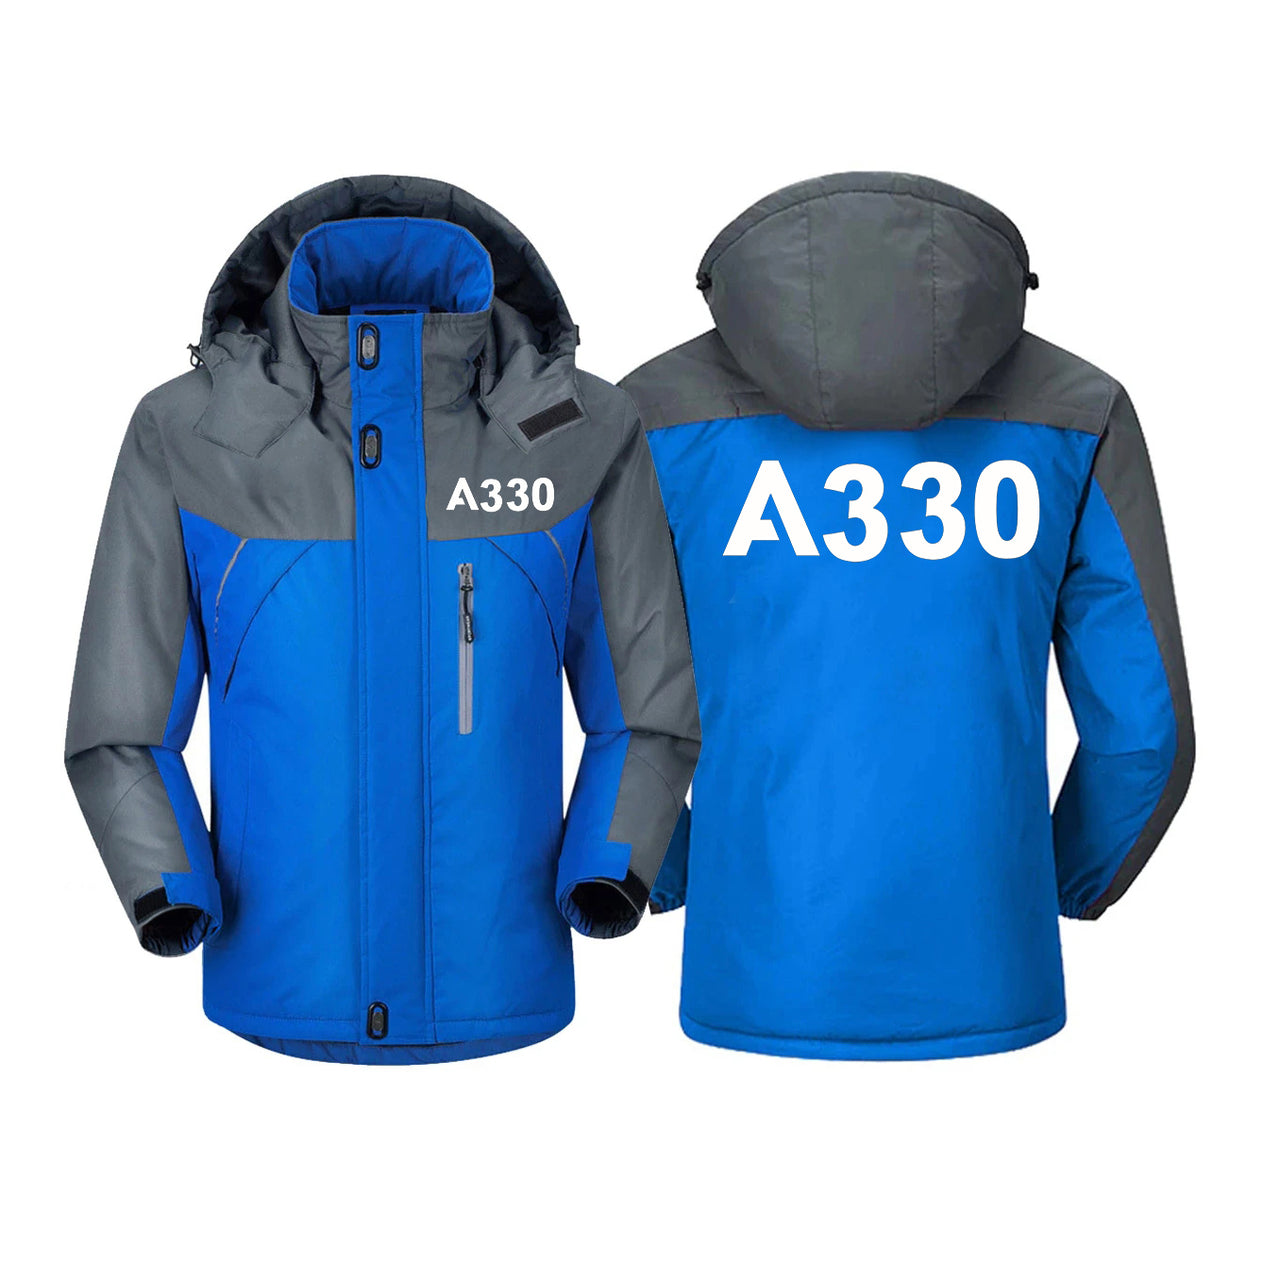 A330 Flat Text Designed Thick Winter Jackets